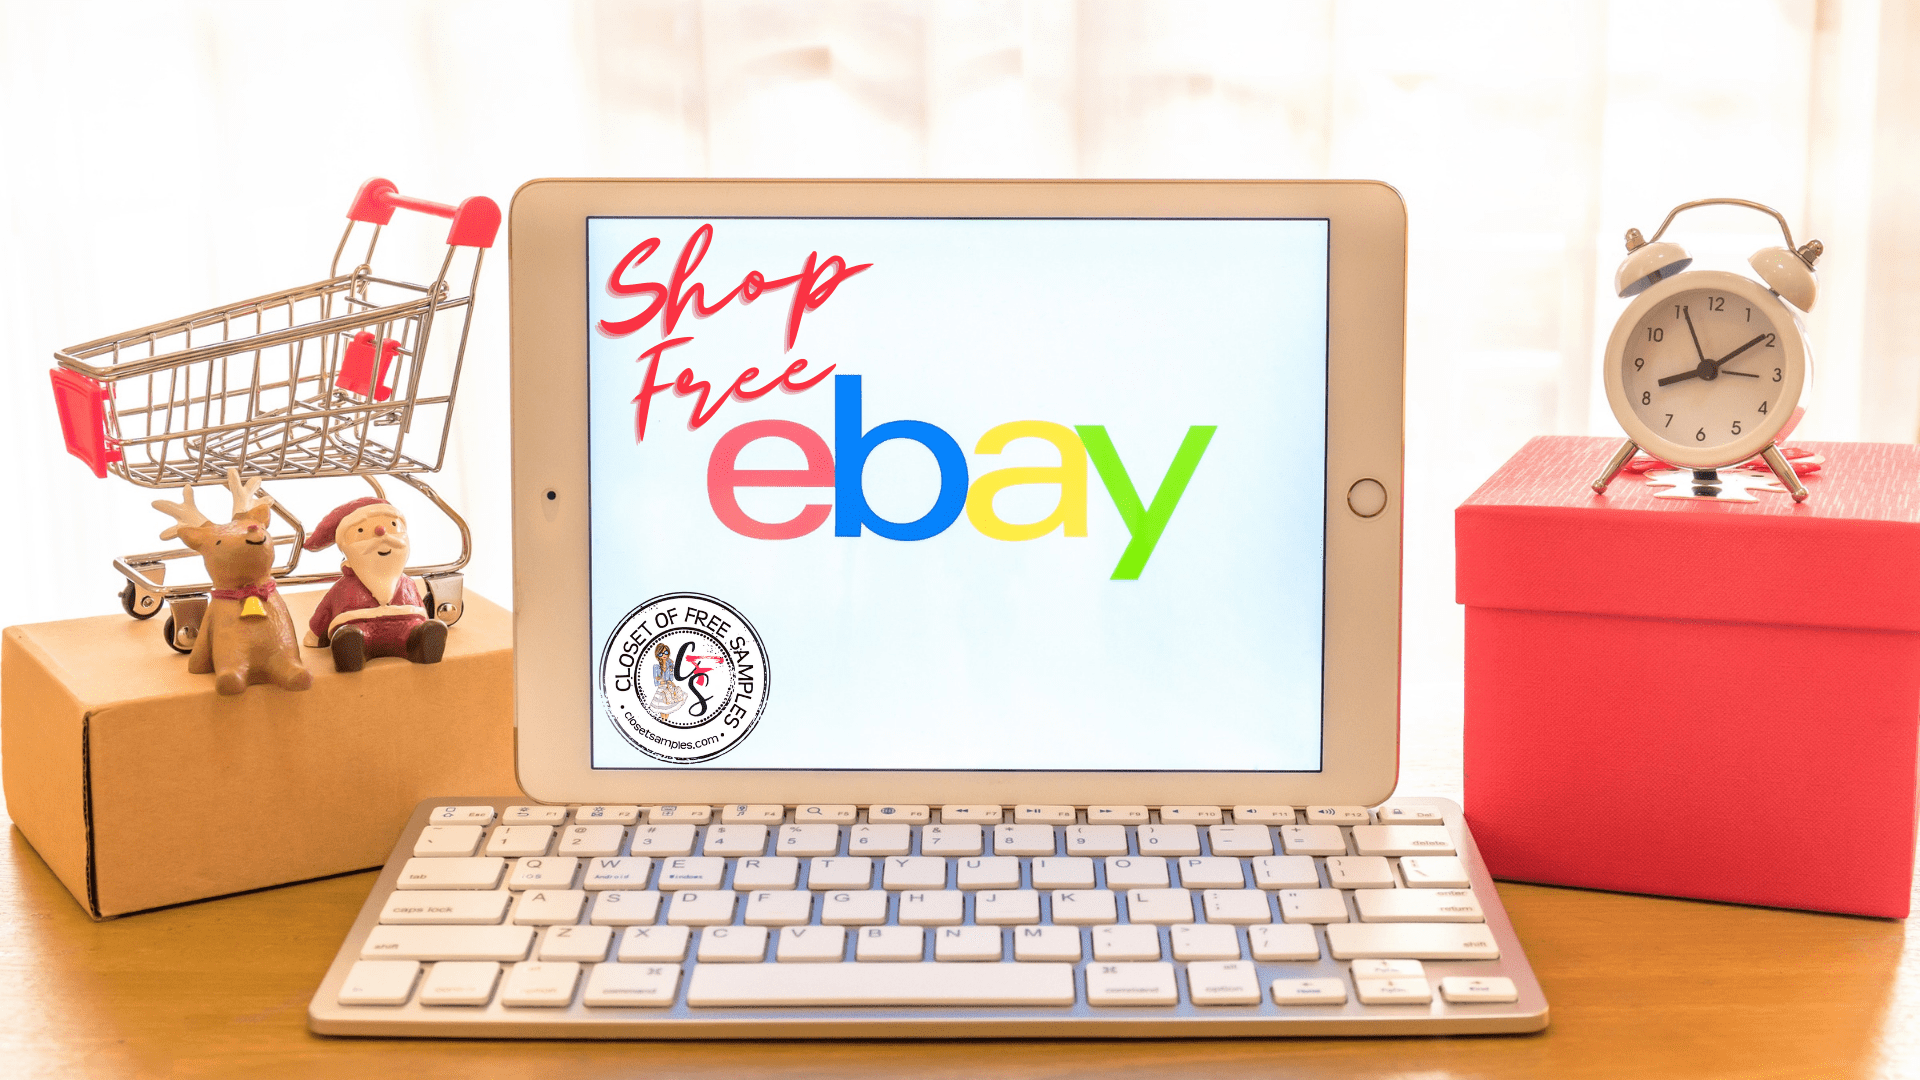 How-to-Get-Free-Stuff-on-eBay-closetsamples.png